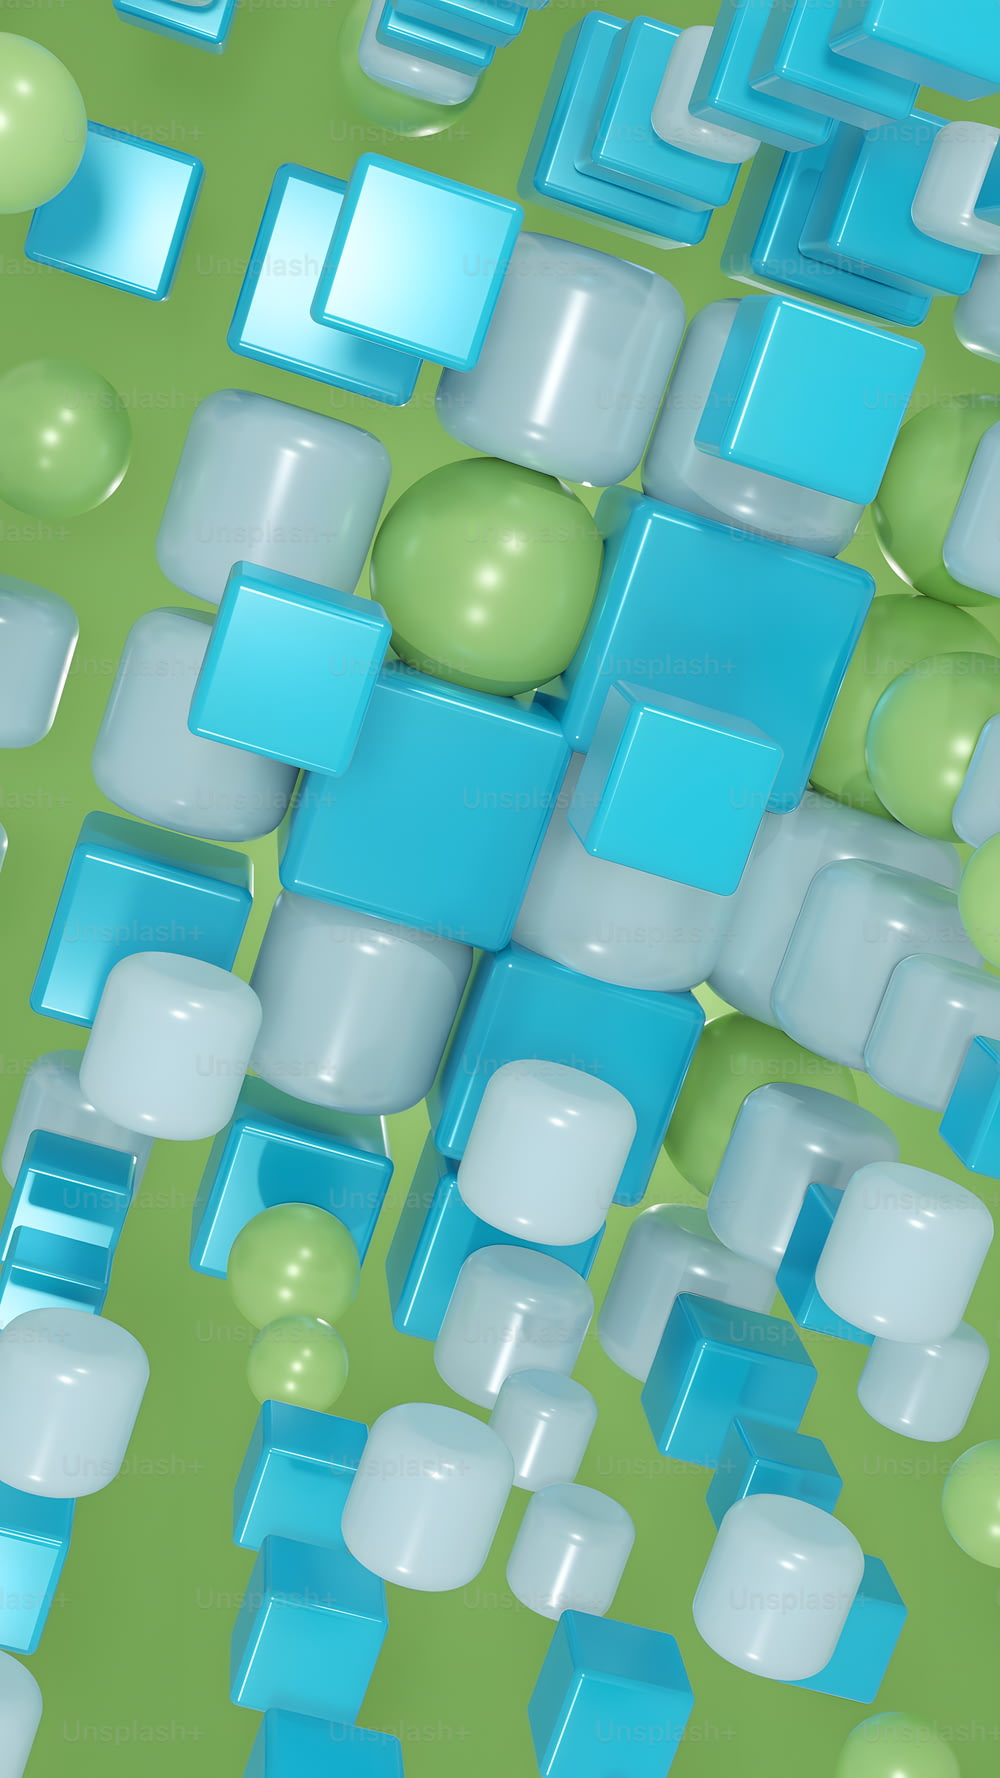 a green and blue abstract background with bubbles and cubes